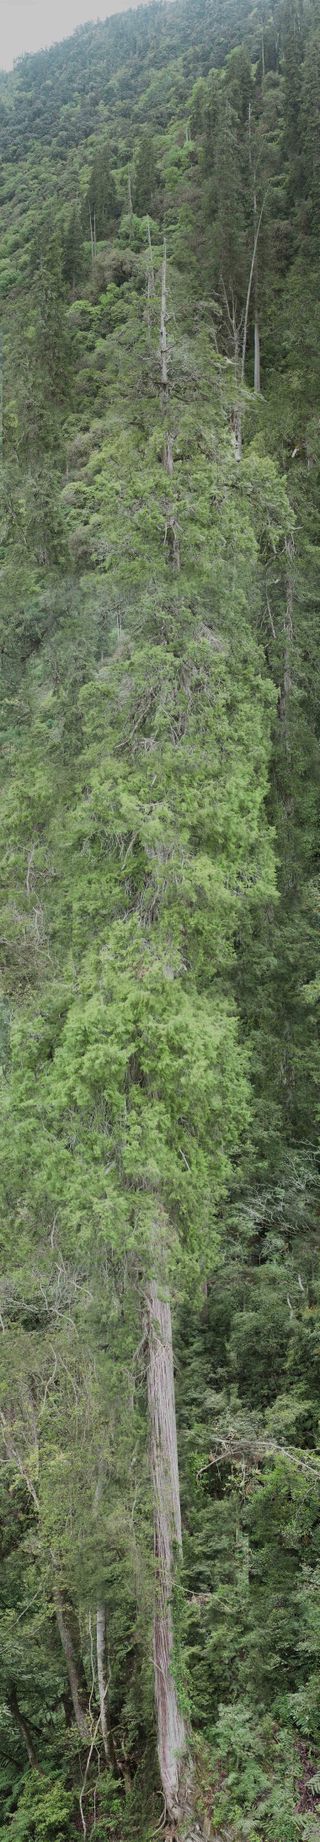 huge image showing the full length of the tallest tree in asia